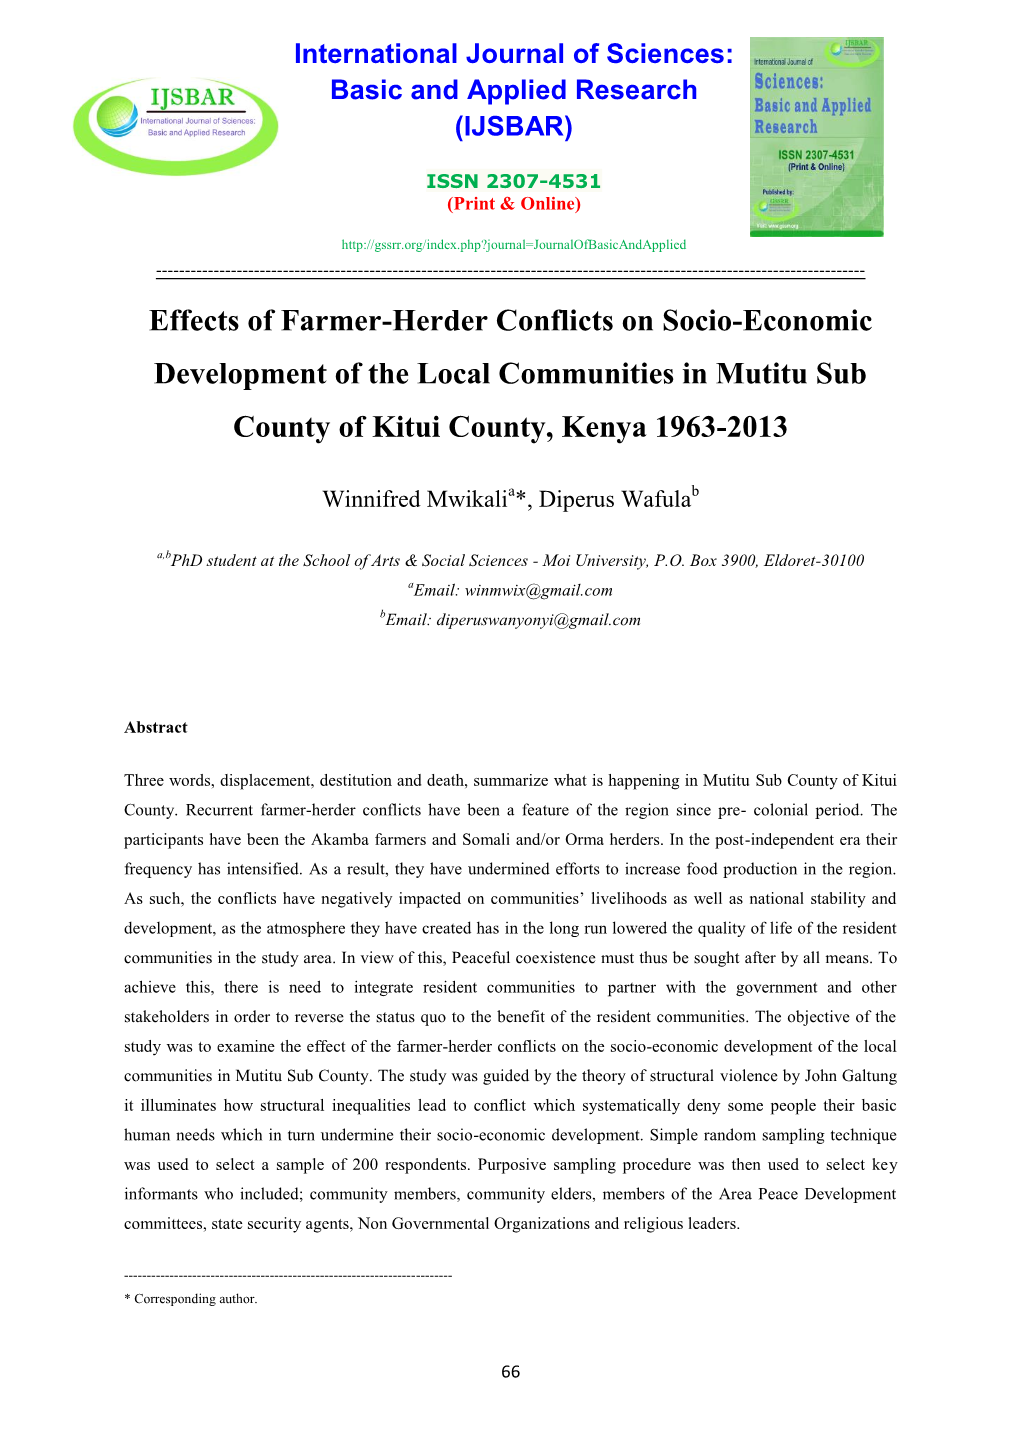 Effects of Farmer-Herder Conflicts on Socio-Economic Development of the Local Communities in Mutitu Sub County of Kitui County, Kenya 1963-2013